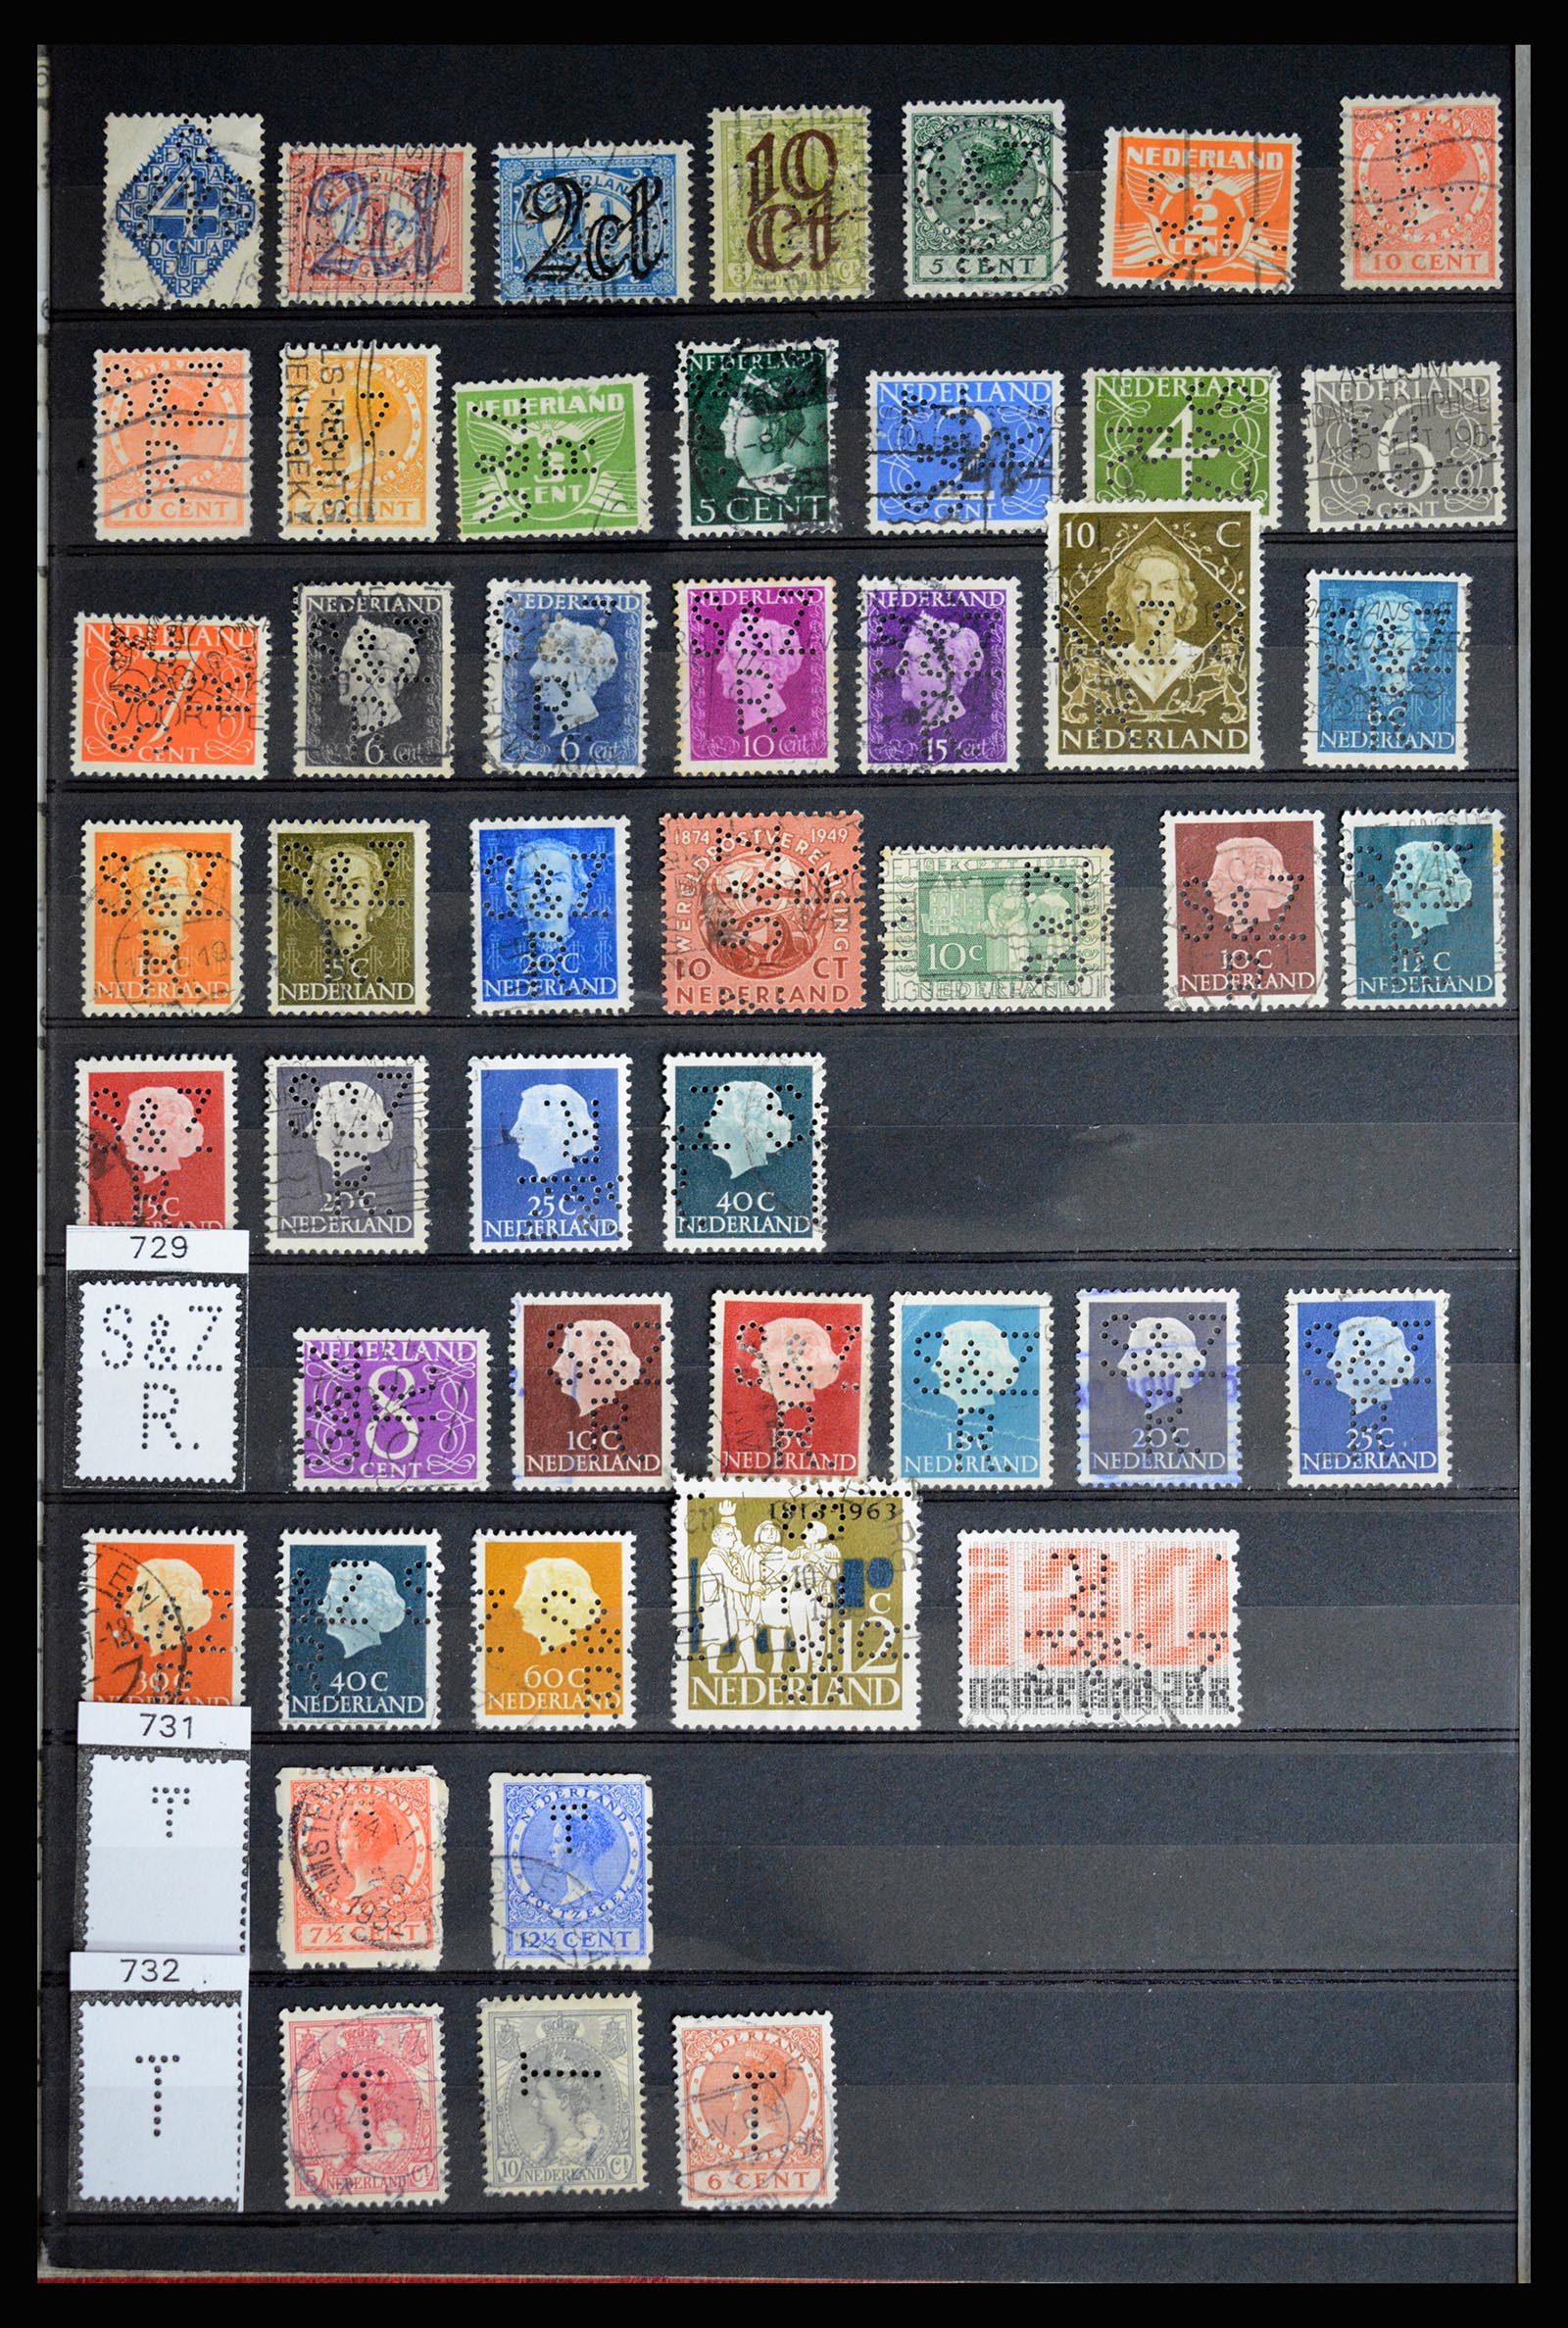 36849 072 - Stamp collection 36849 Netherlands perfins 1891-1960.